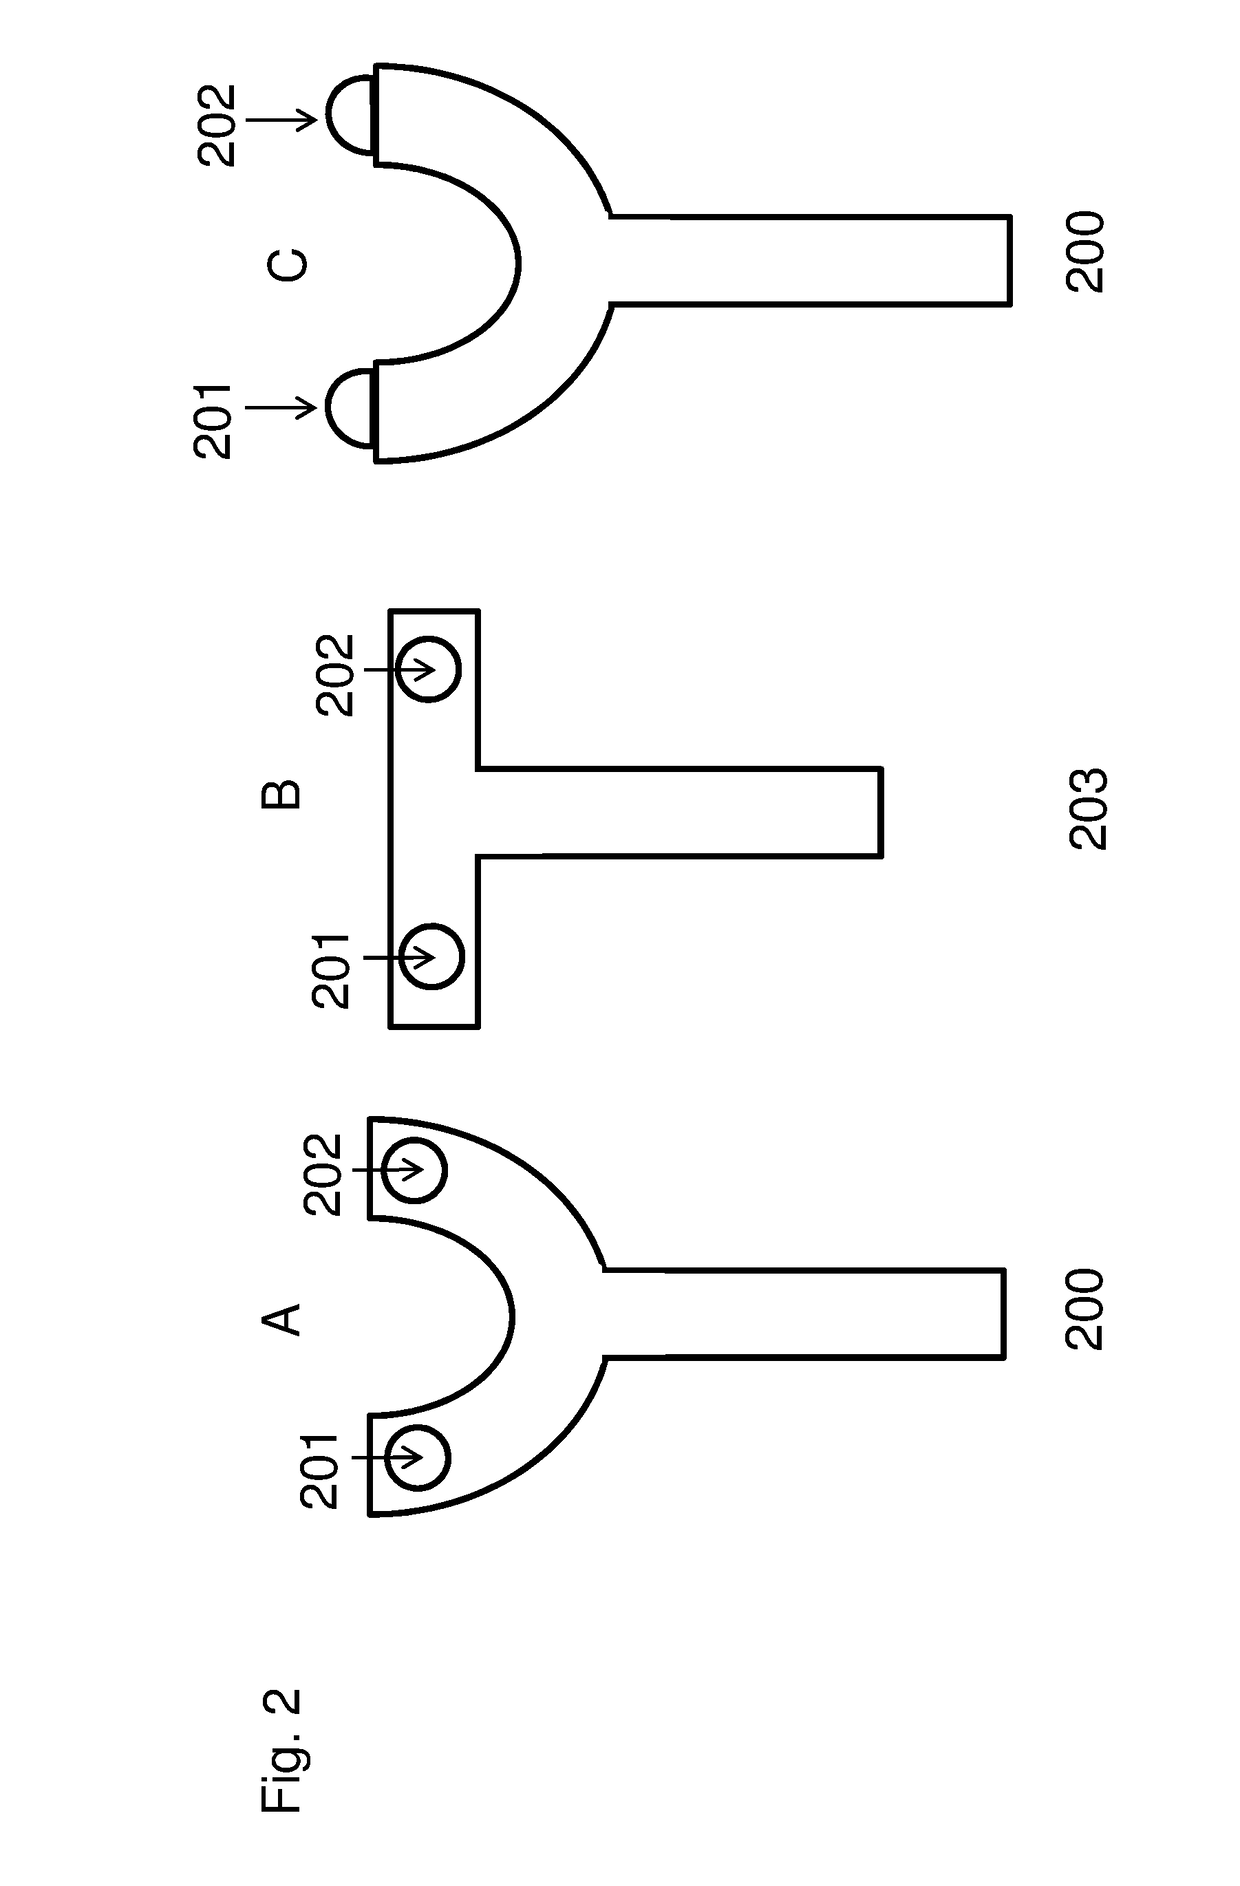 Devices, kits, and methods for determining ineffectiveness of anesthetics